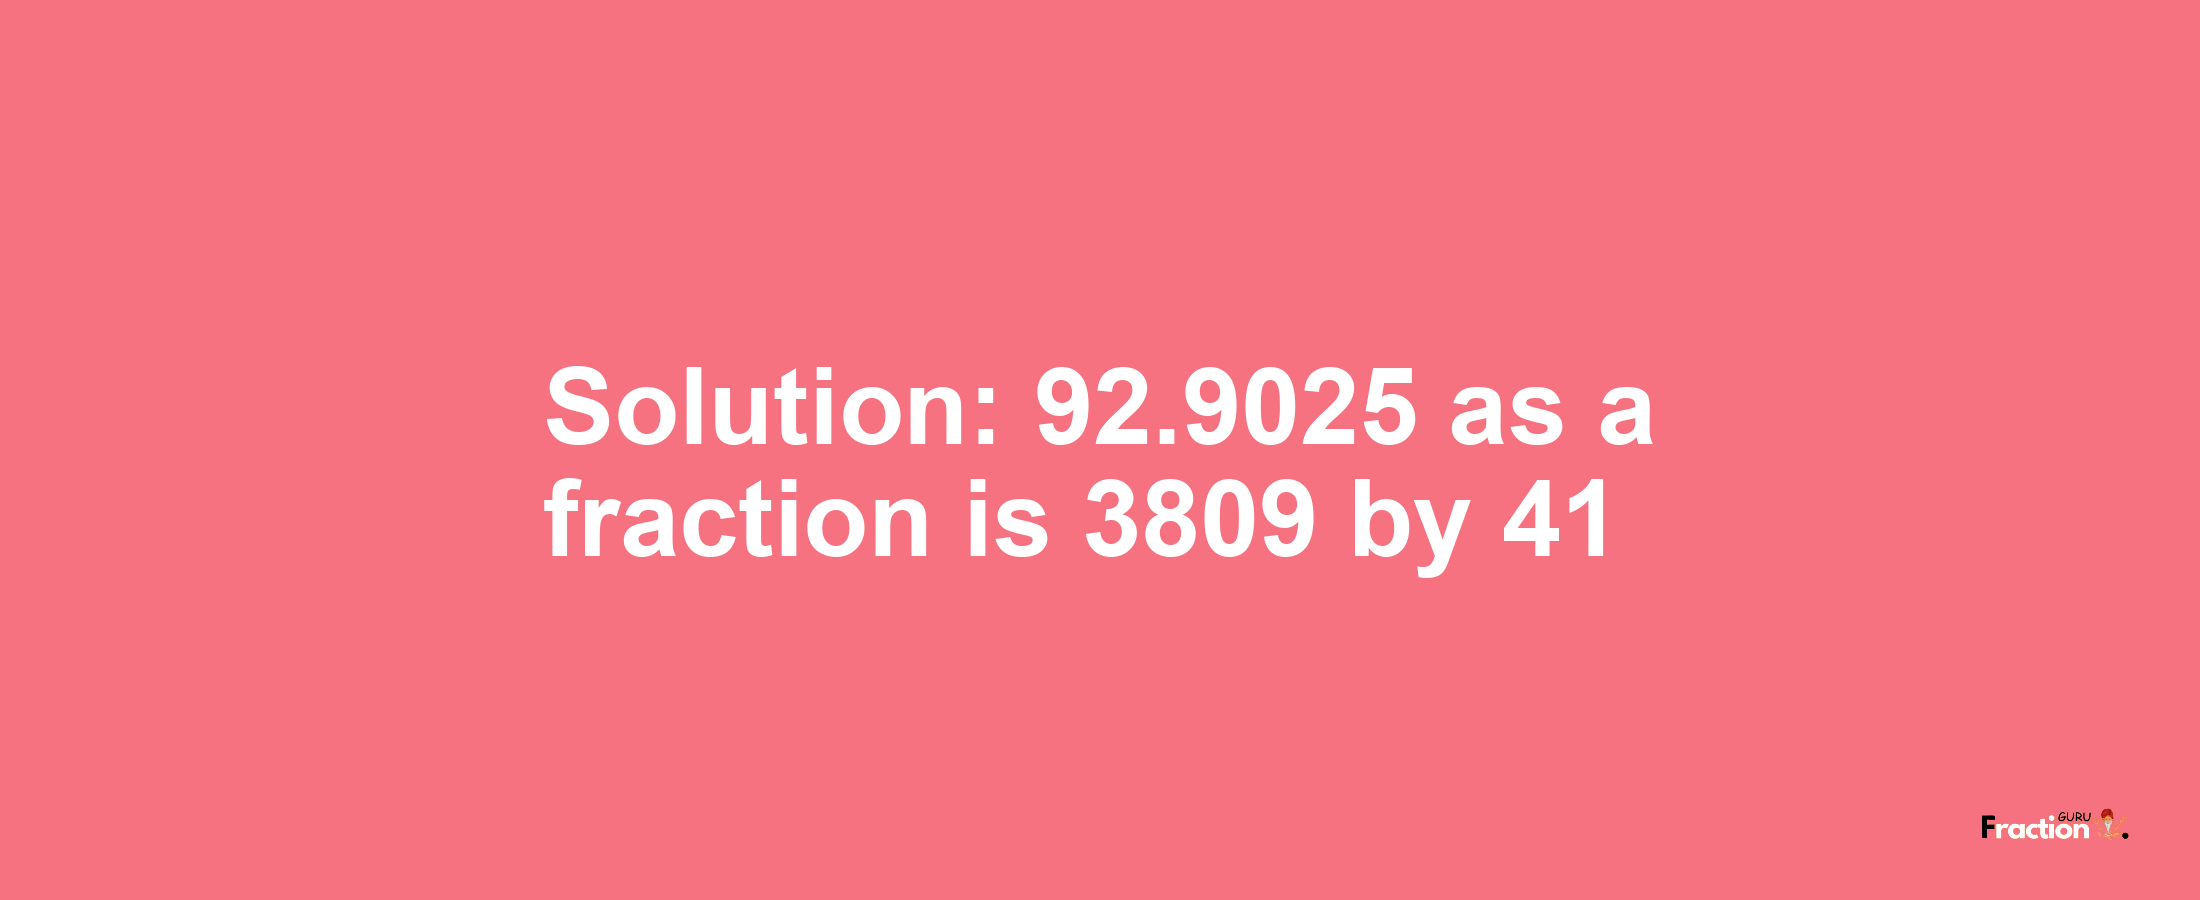 Solution:92.9025 as a fraction is 3809/41